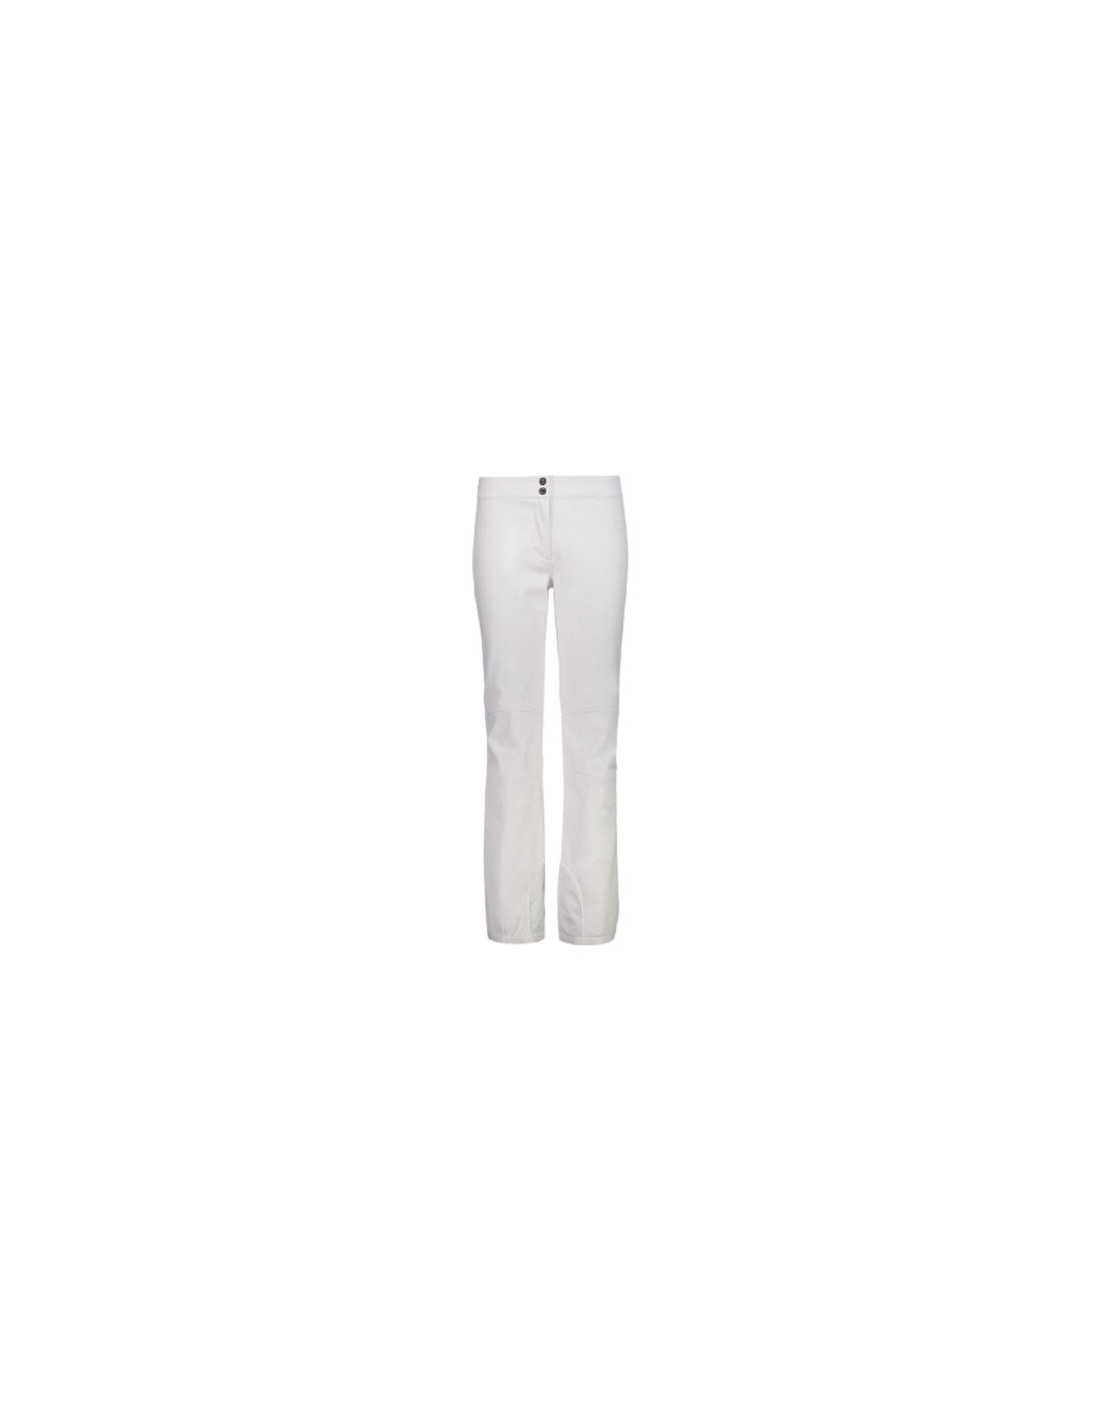 WOMAN PANT WITH INNER GAITER